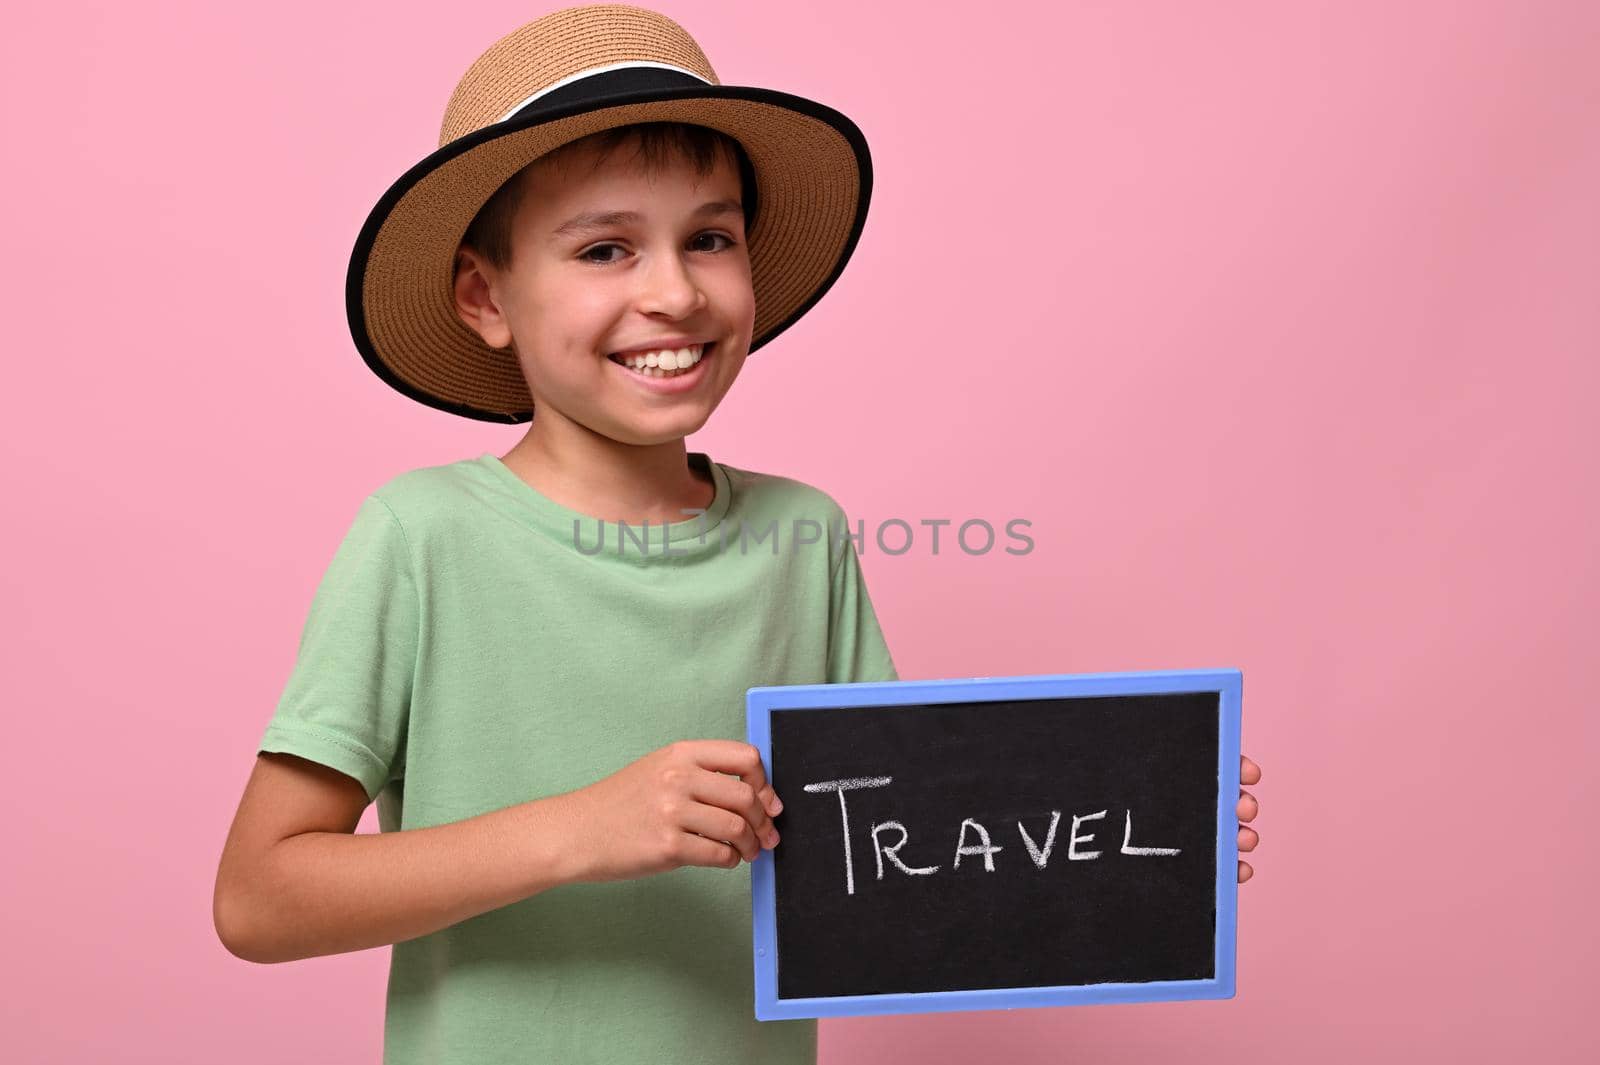 Handsome boy holding a board with travel lettering, smiling, looking at the camera. Pink background with copy space